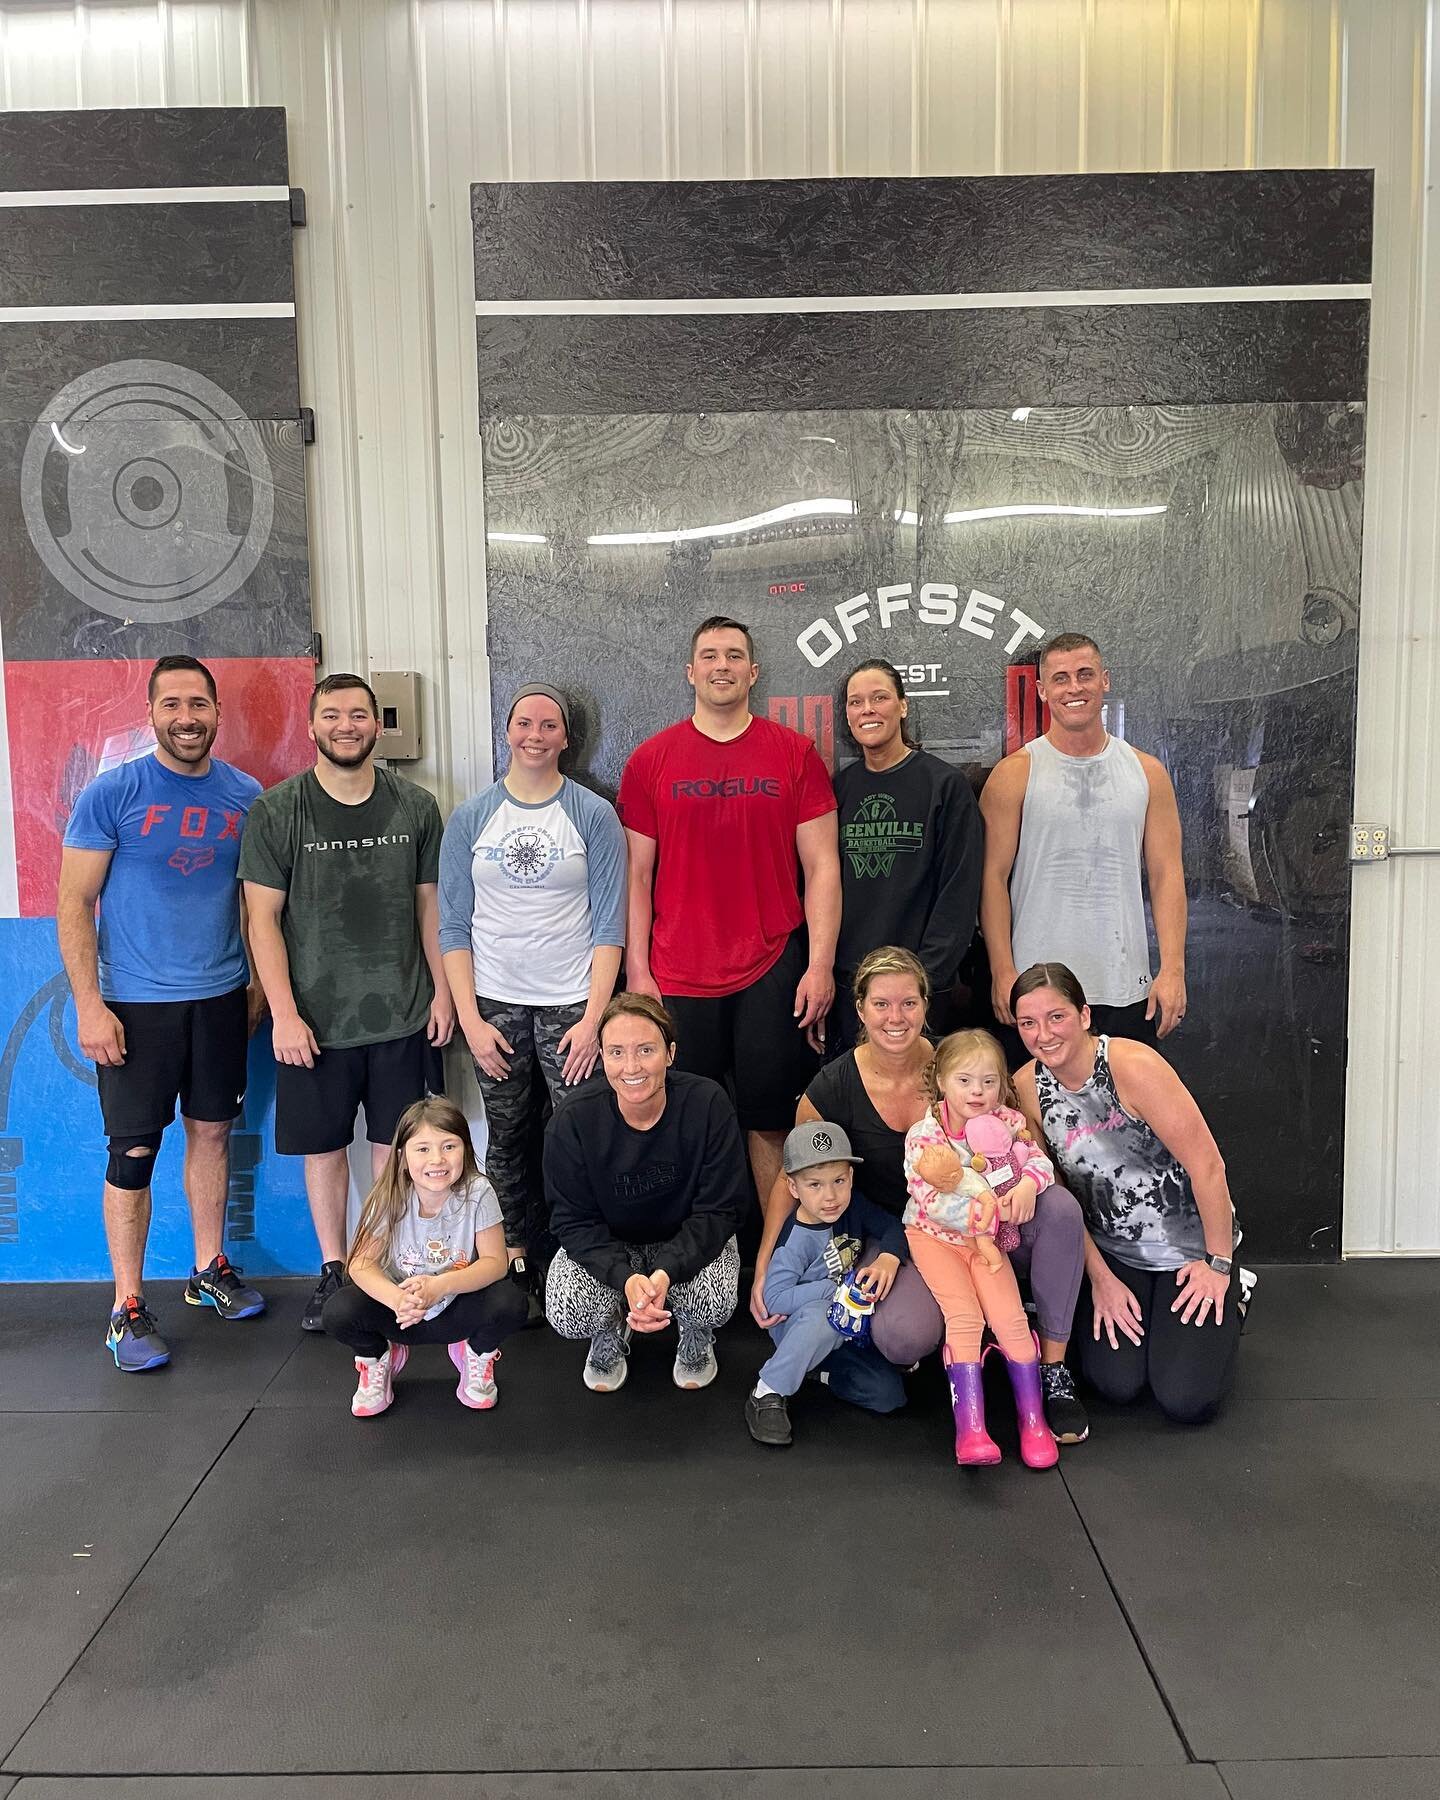 Great Saturday group 💪🏻